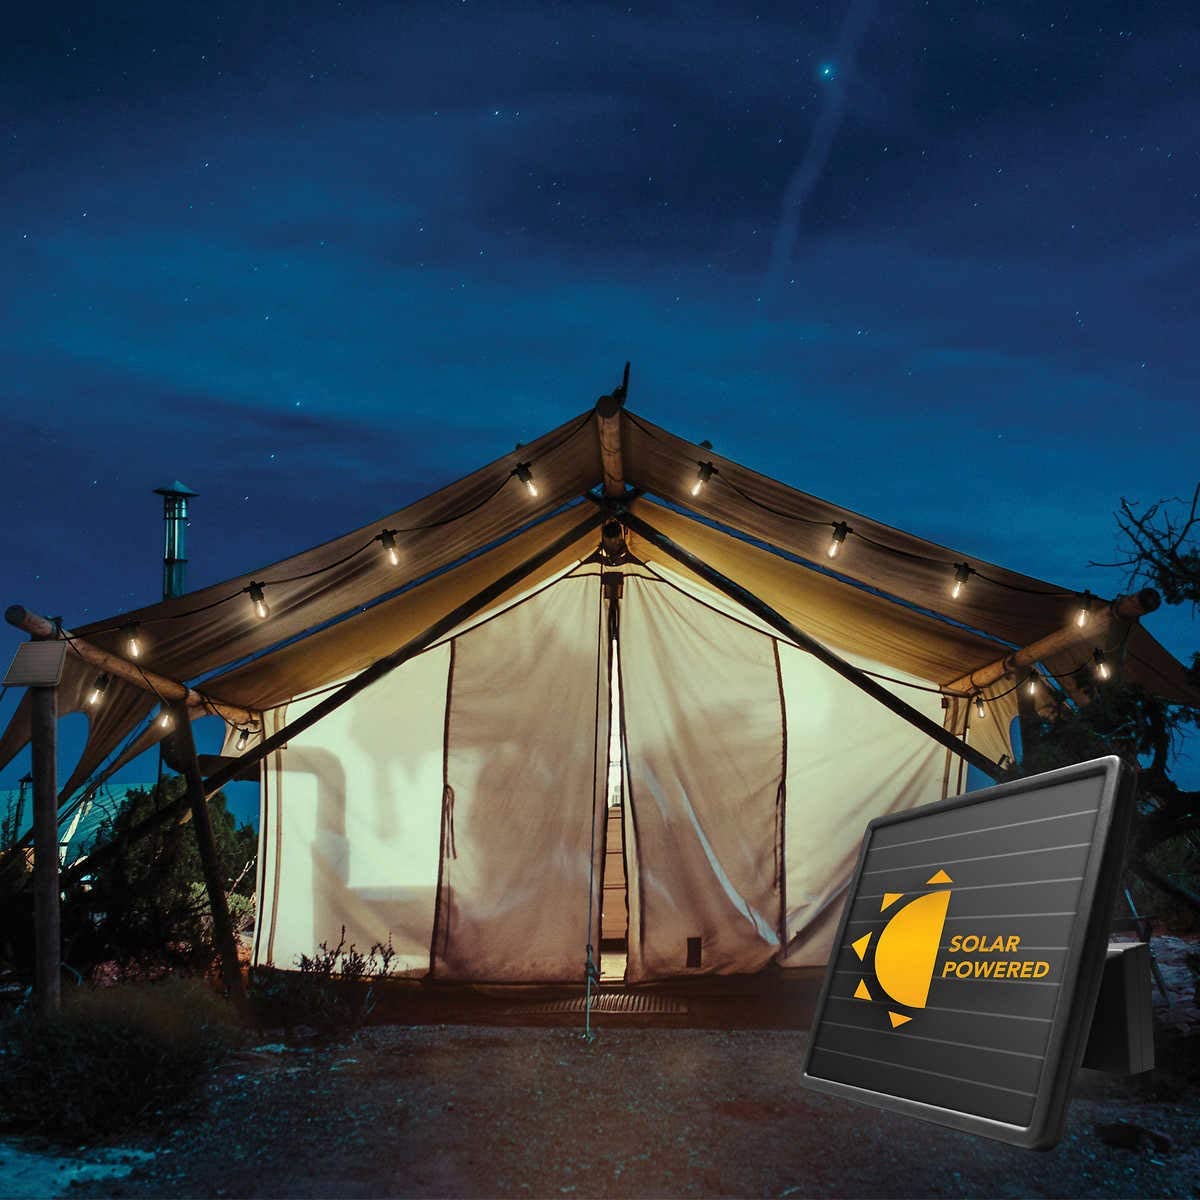 Sunforce LED Solar String Light 35 ft 15 LED Solar String Lights with Remote Control. 15 warm LED bulbs.Designed for outdoor or indoor, Wireless remote control activation-424882